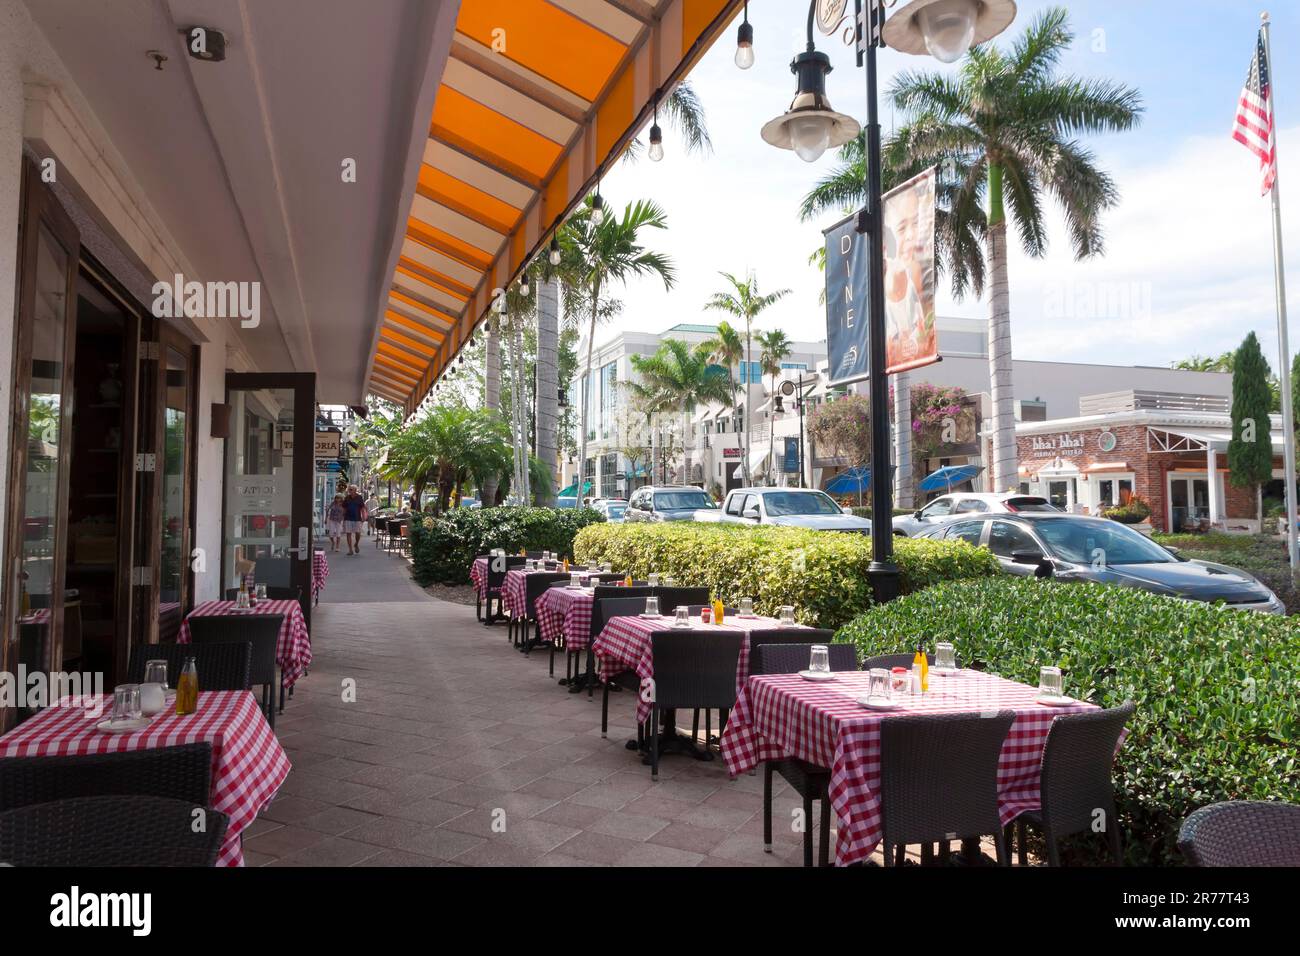 Empty outdoor restaurant tables during the height of tourist season on the sidewalk on 5th Avenue South in Naples, Florida, United States. Stock Photo